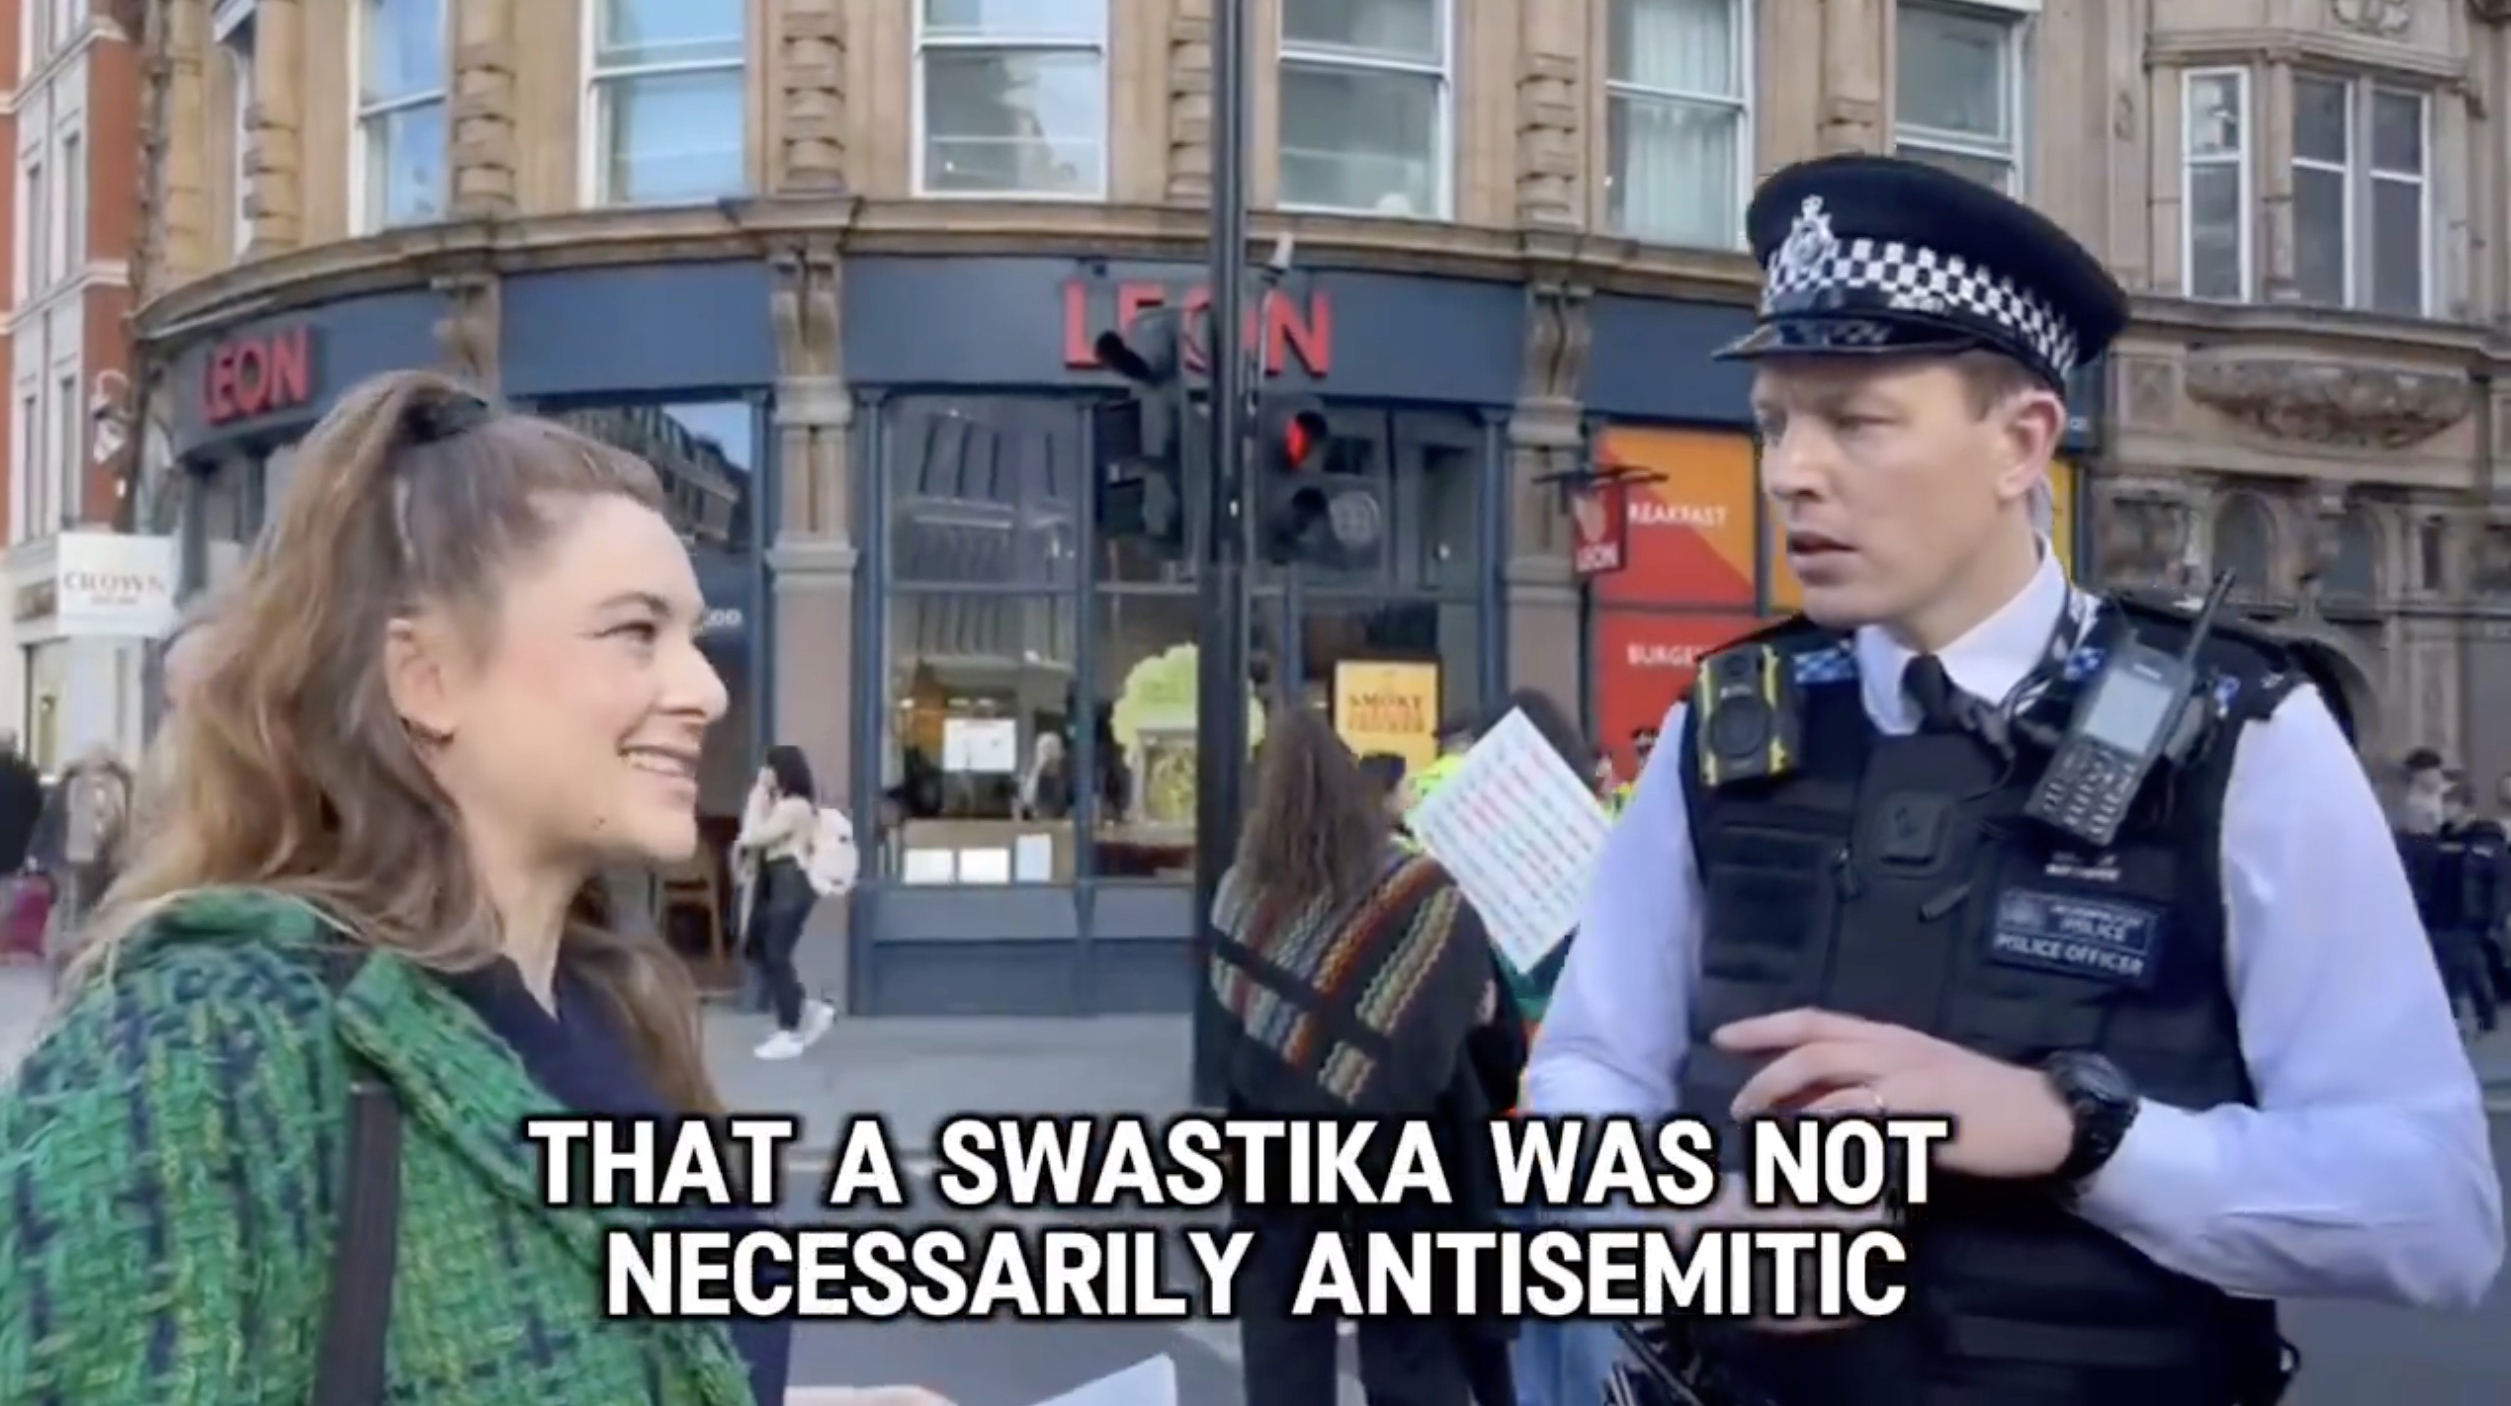 A Met cop insists that swastikas 'need to be taken in context' at a pro-Palestine protest